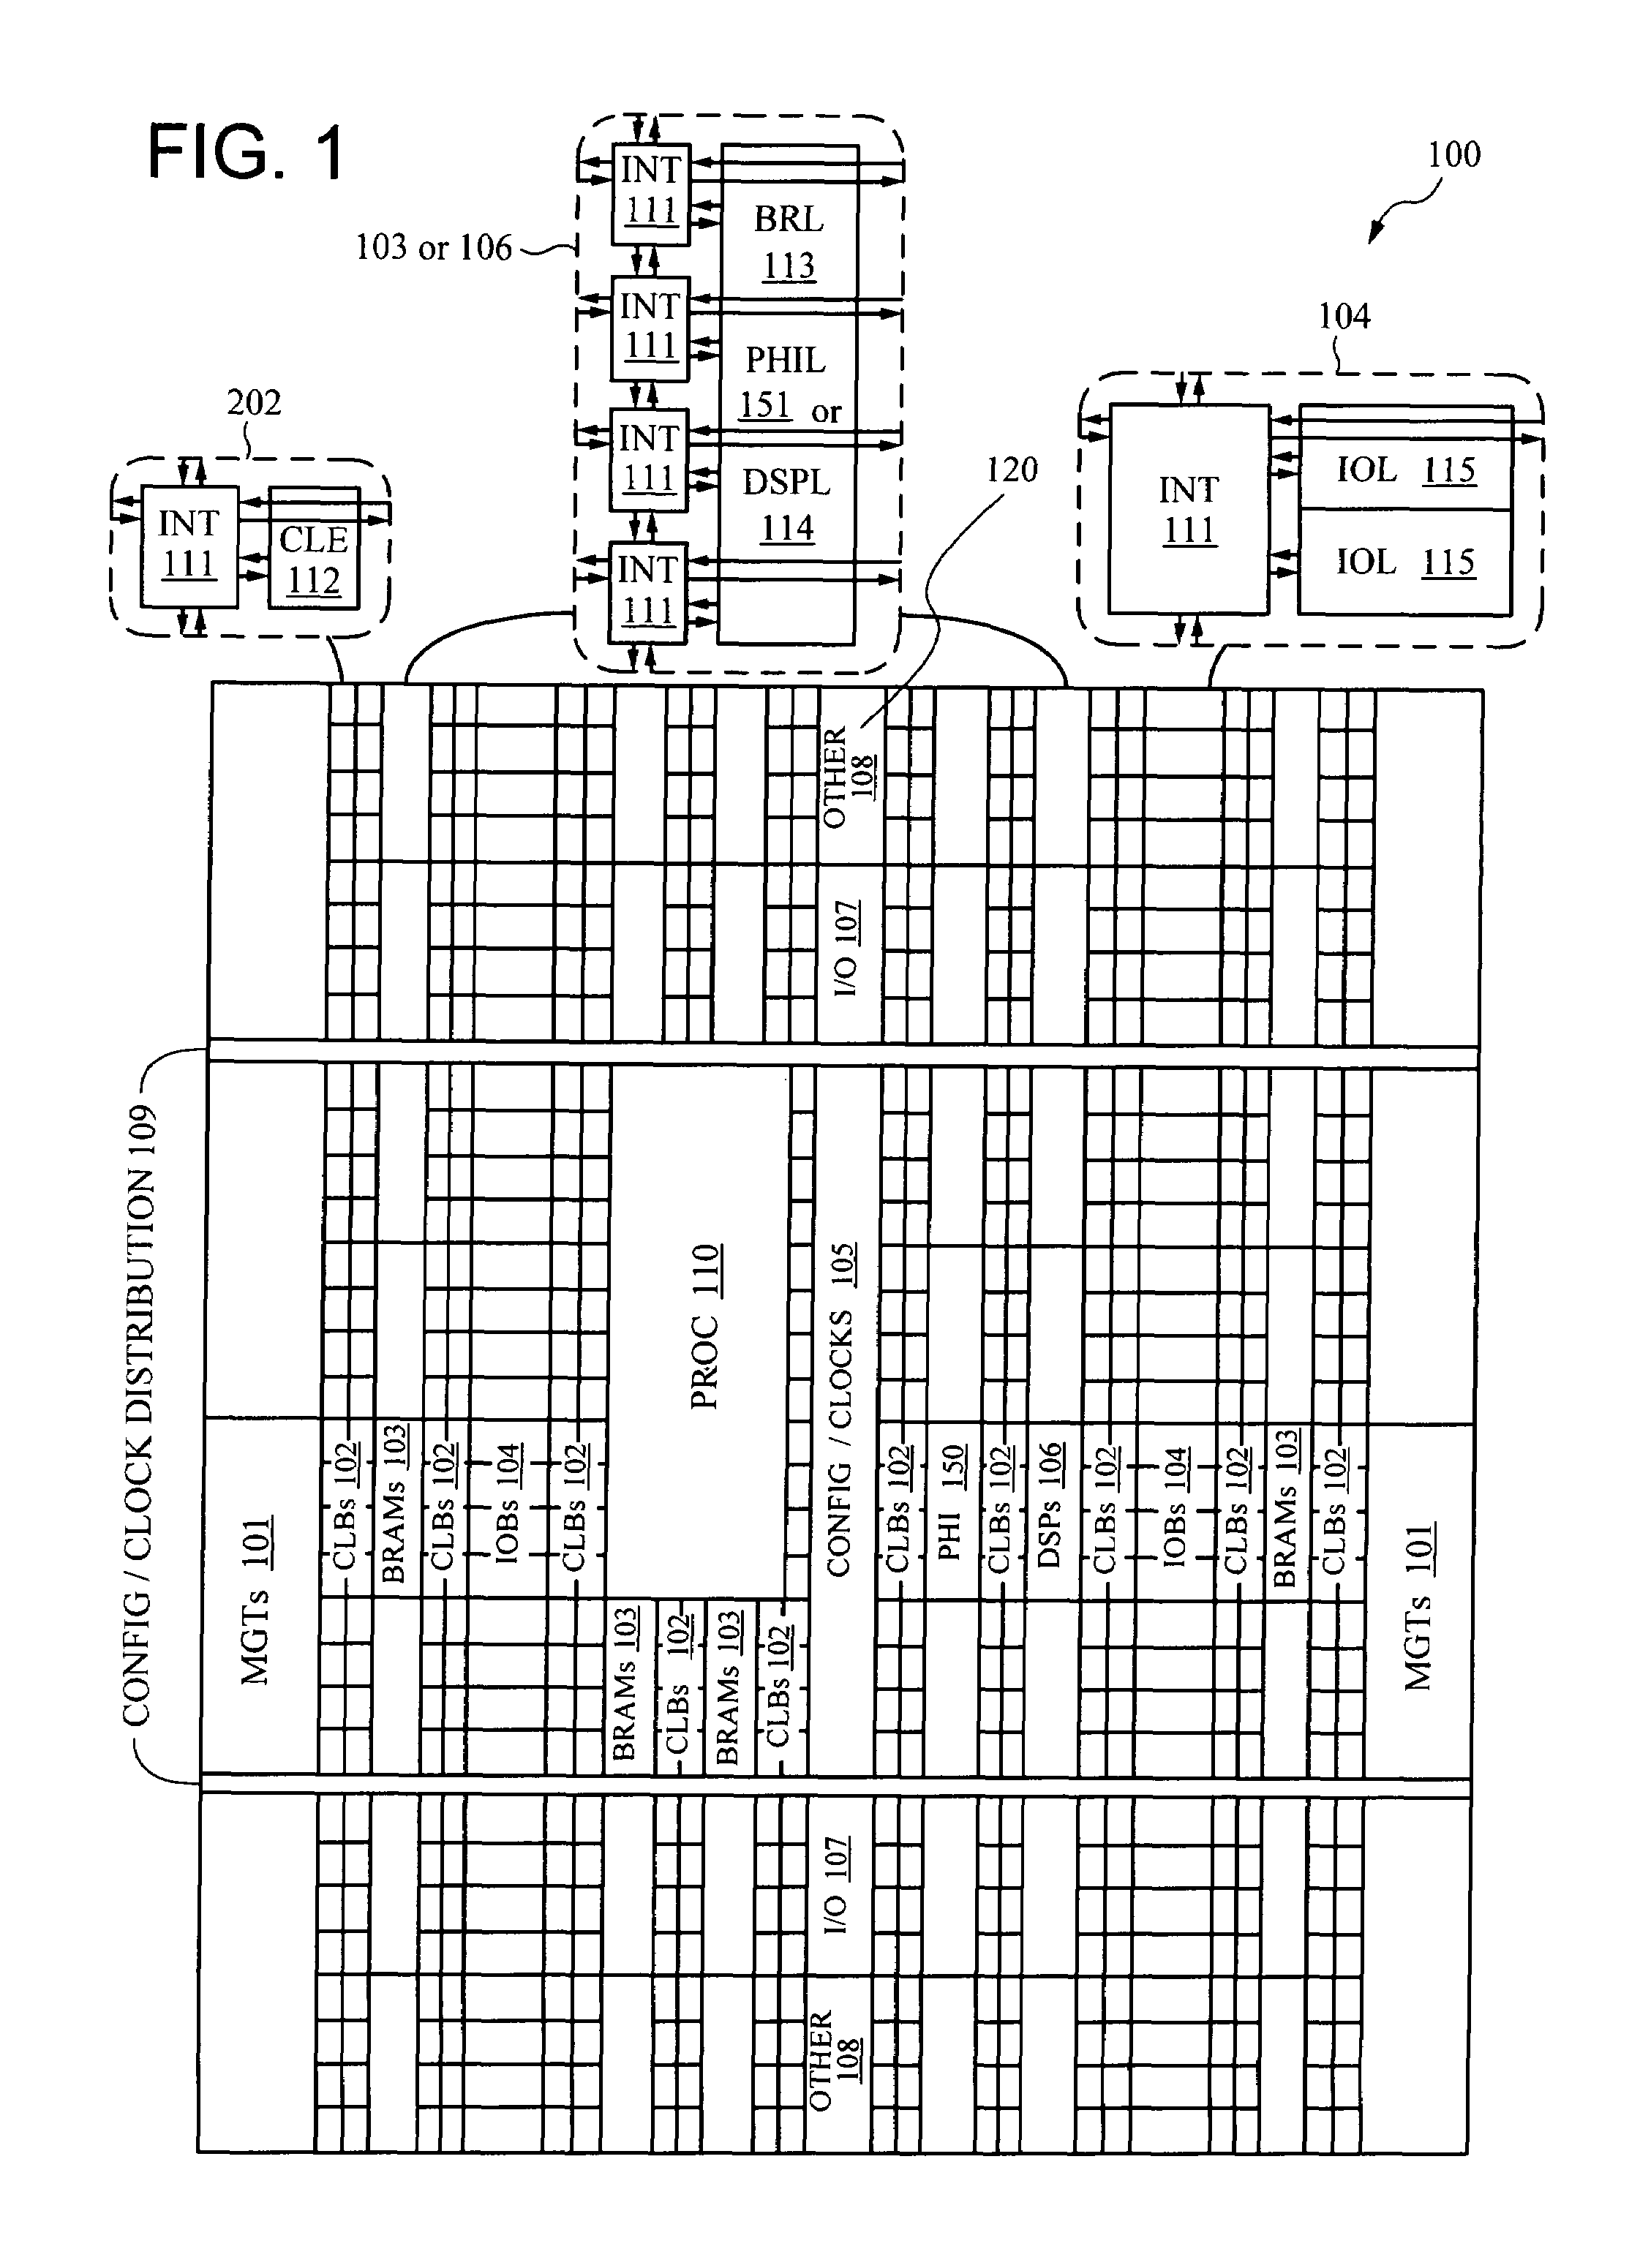 Integrated circuit with through-die via interface for die stacking